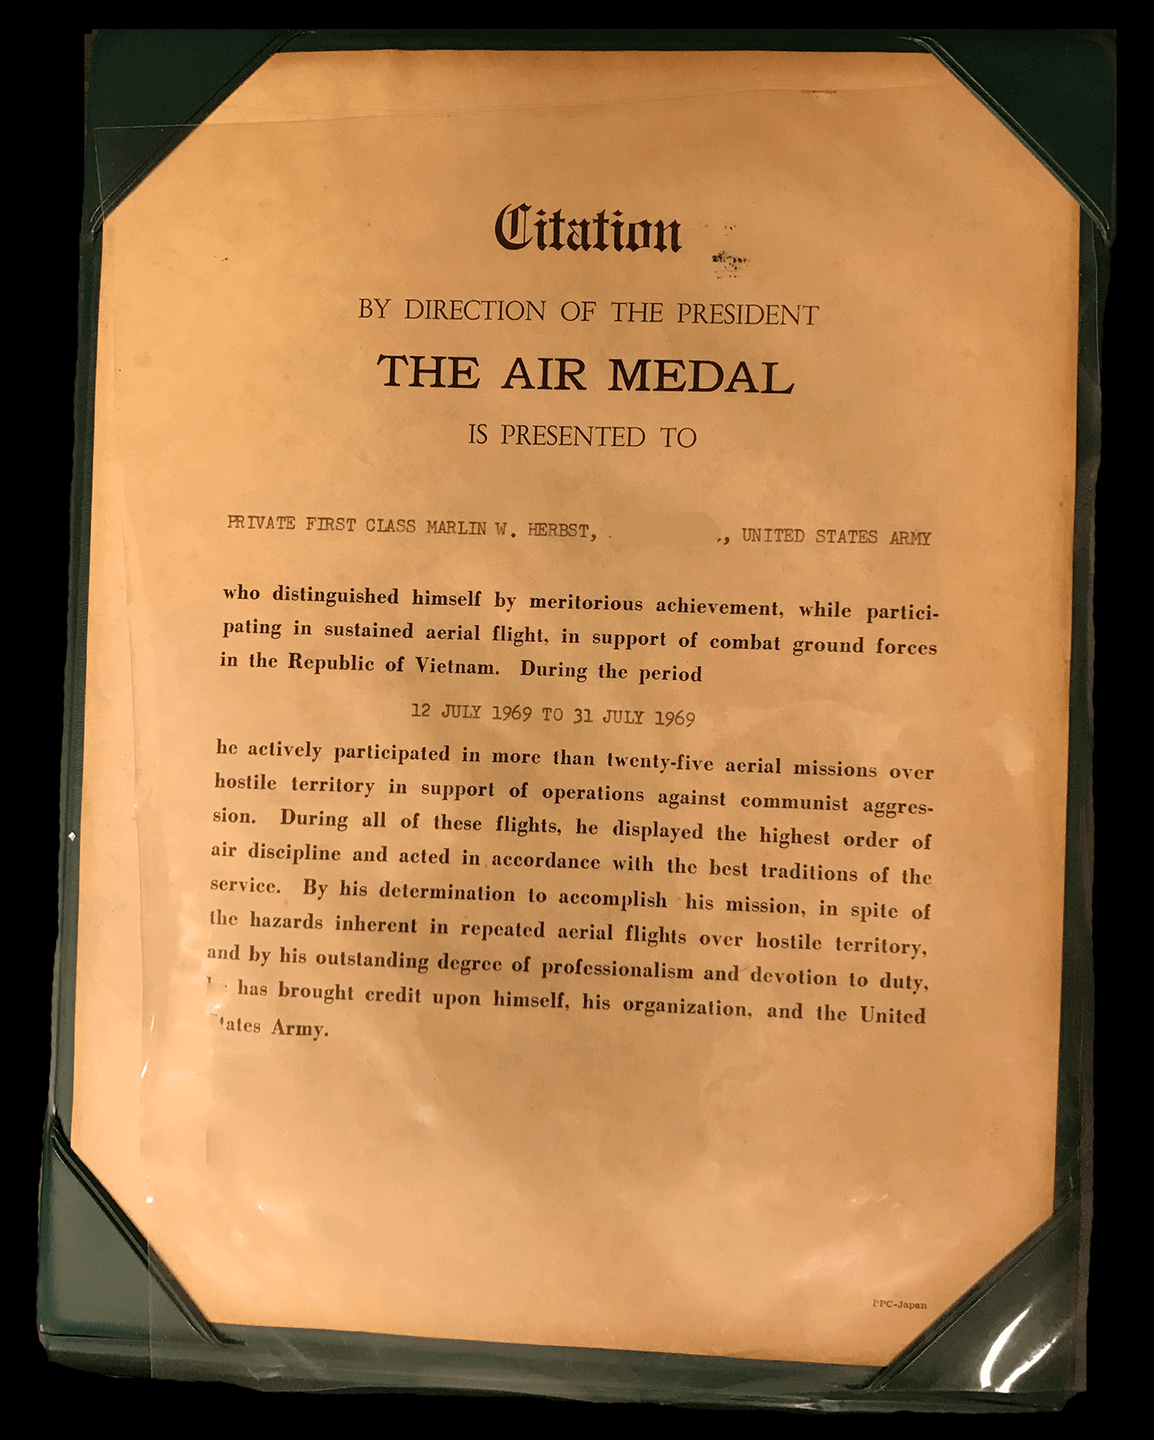 Citation for an Air Medal, presented to Marlin Herbst for period of 7-12-1969 through 7-31-1969.